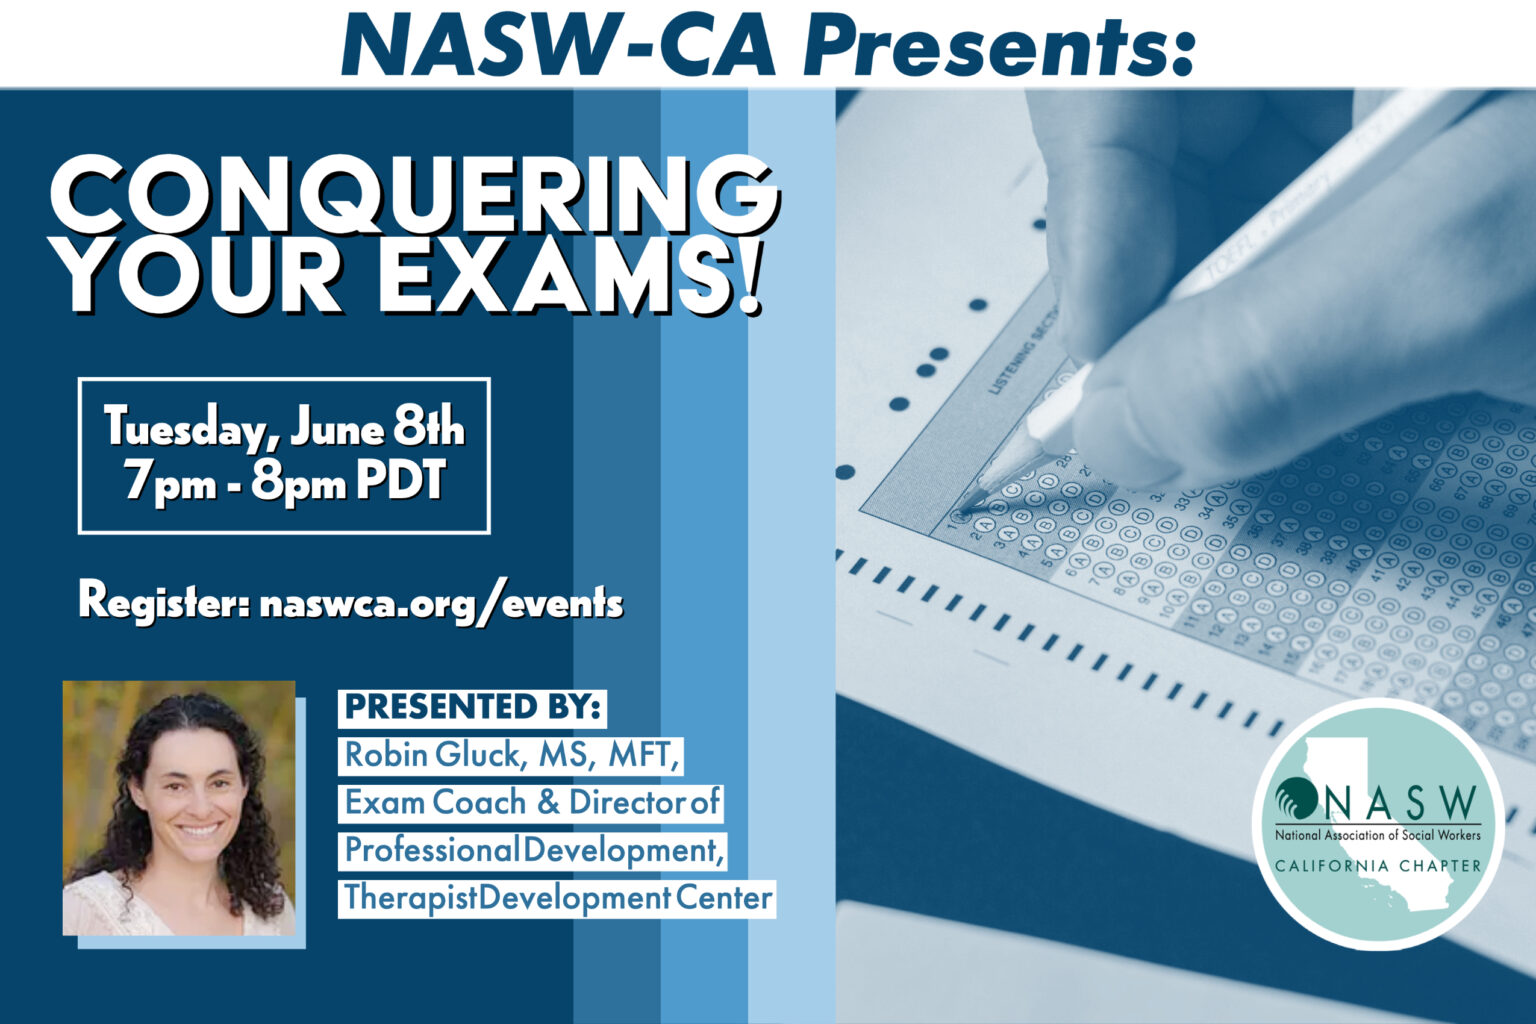 Conquer Your Exams! NASWCA is collaborating with Therapist Development